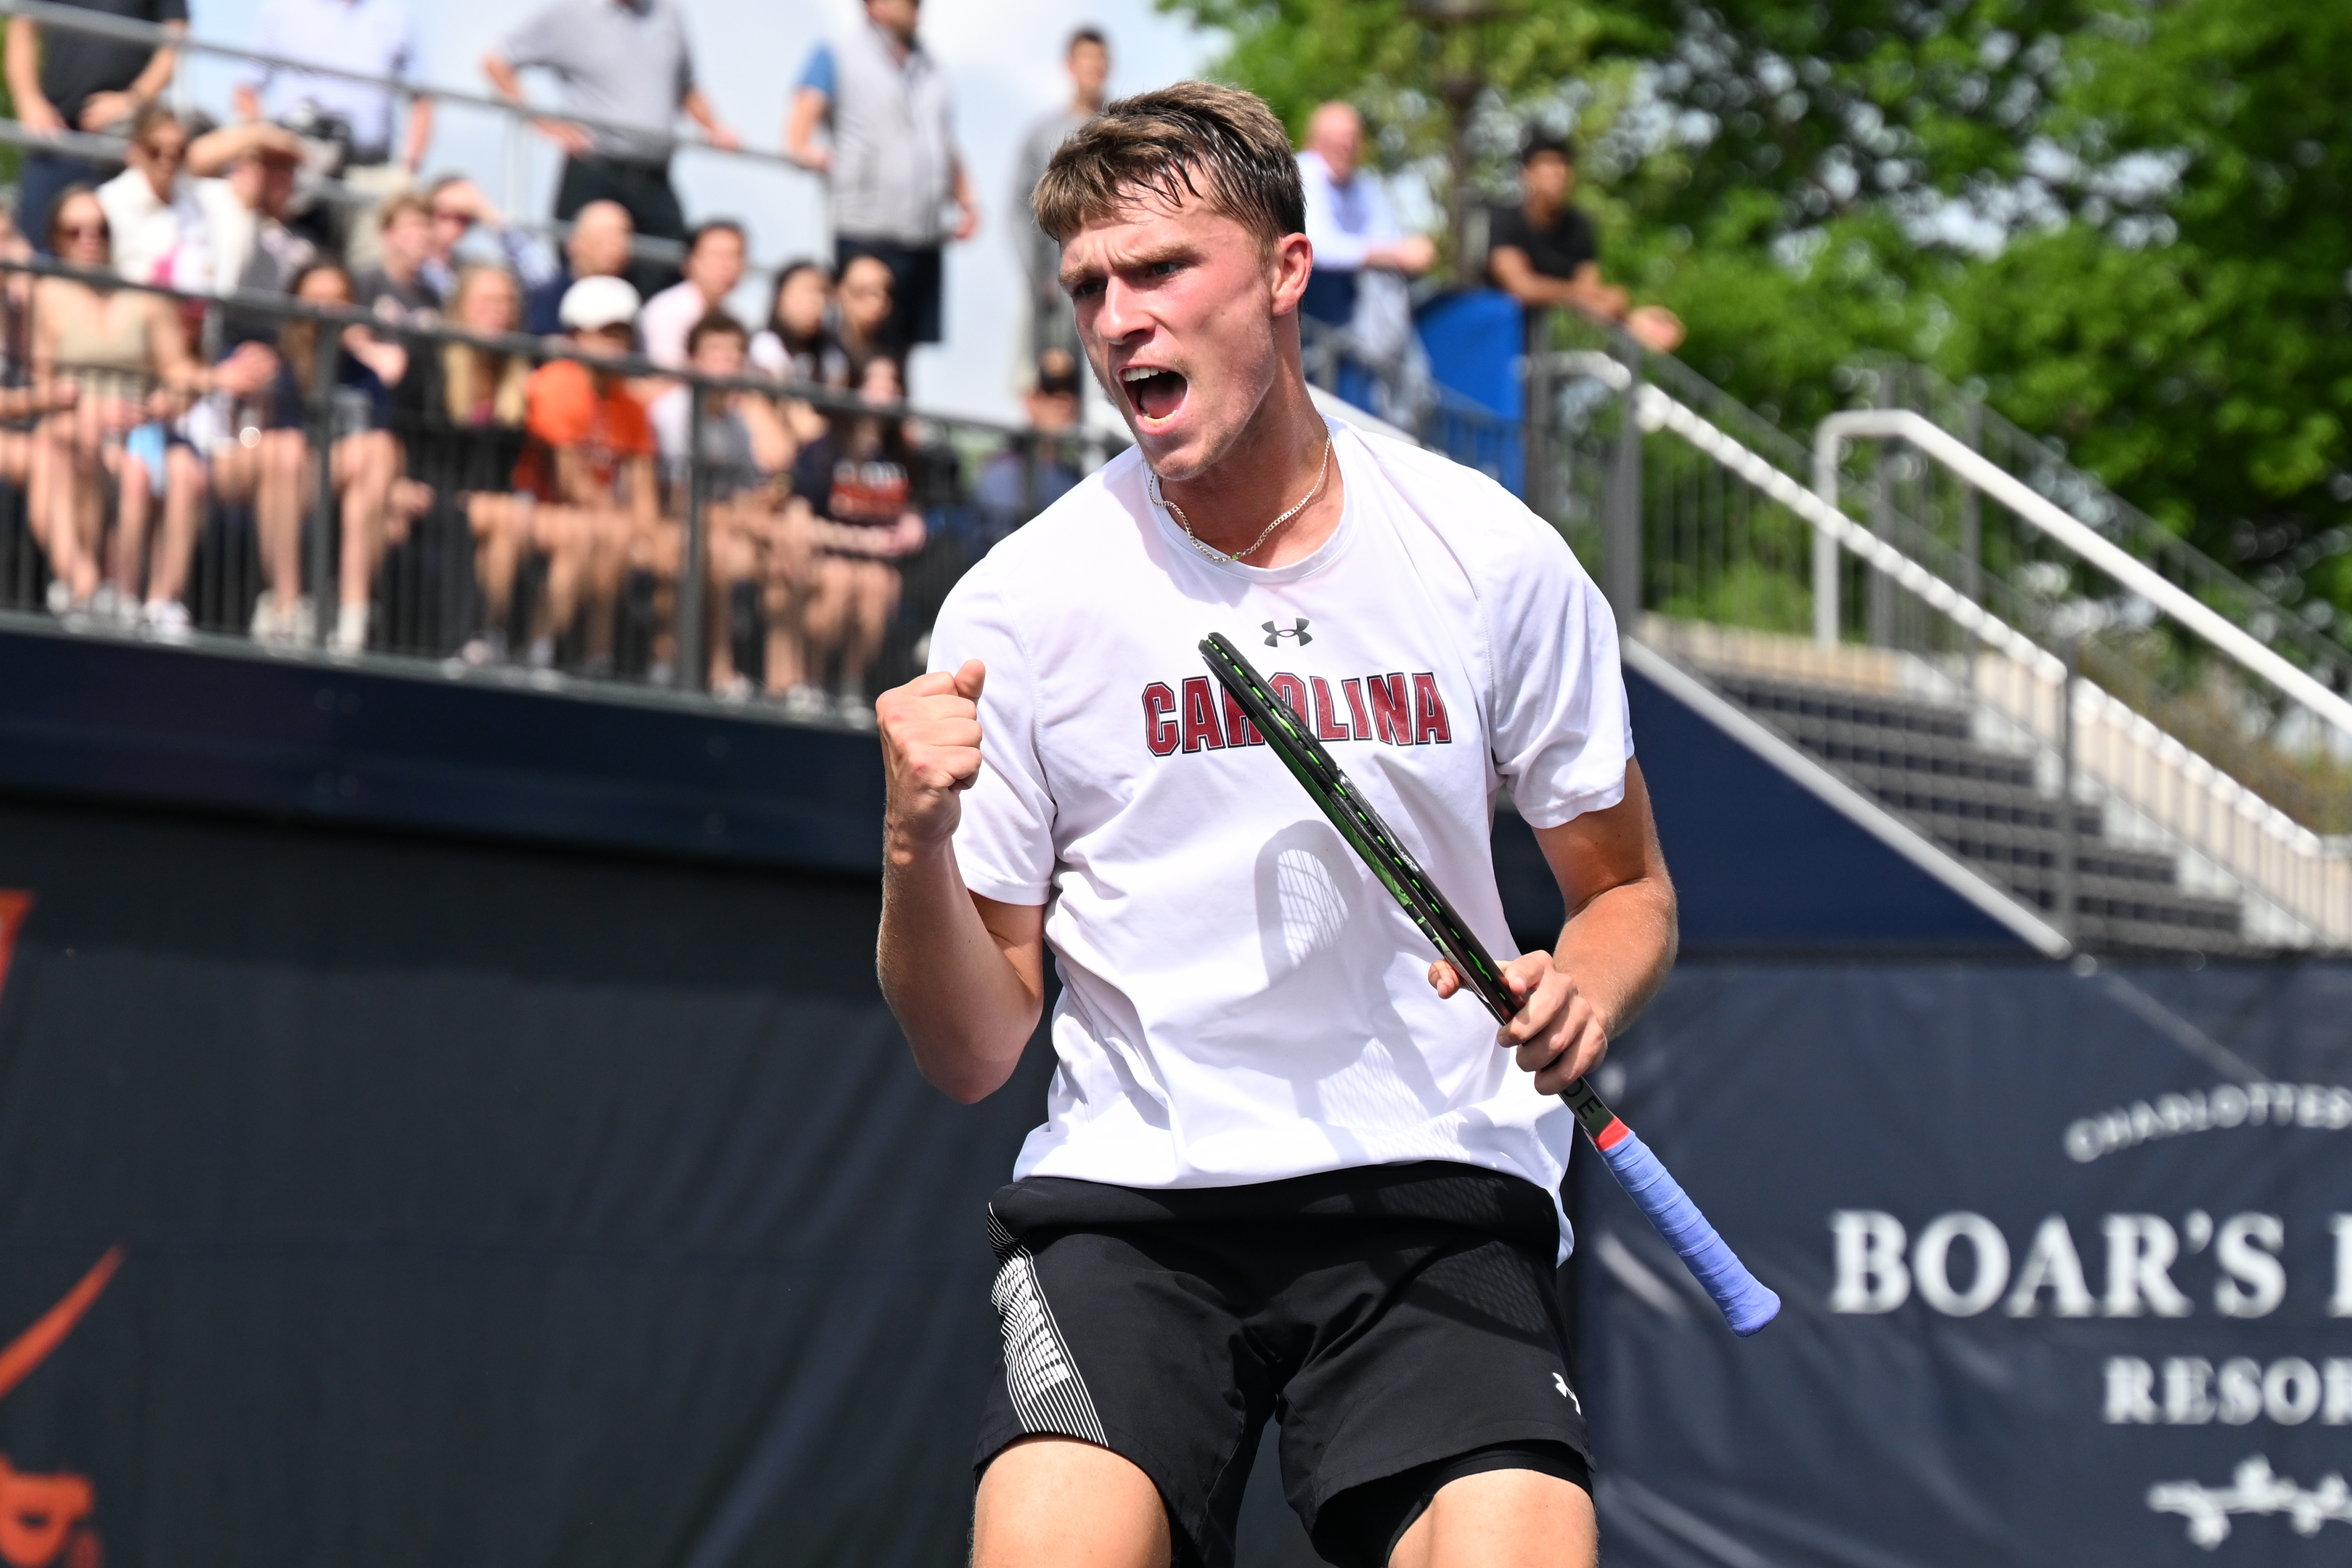 Gamecocks Singles and Doubles Entries Advance at Regionals